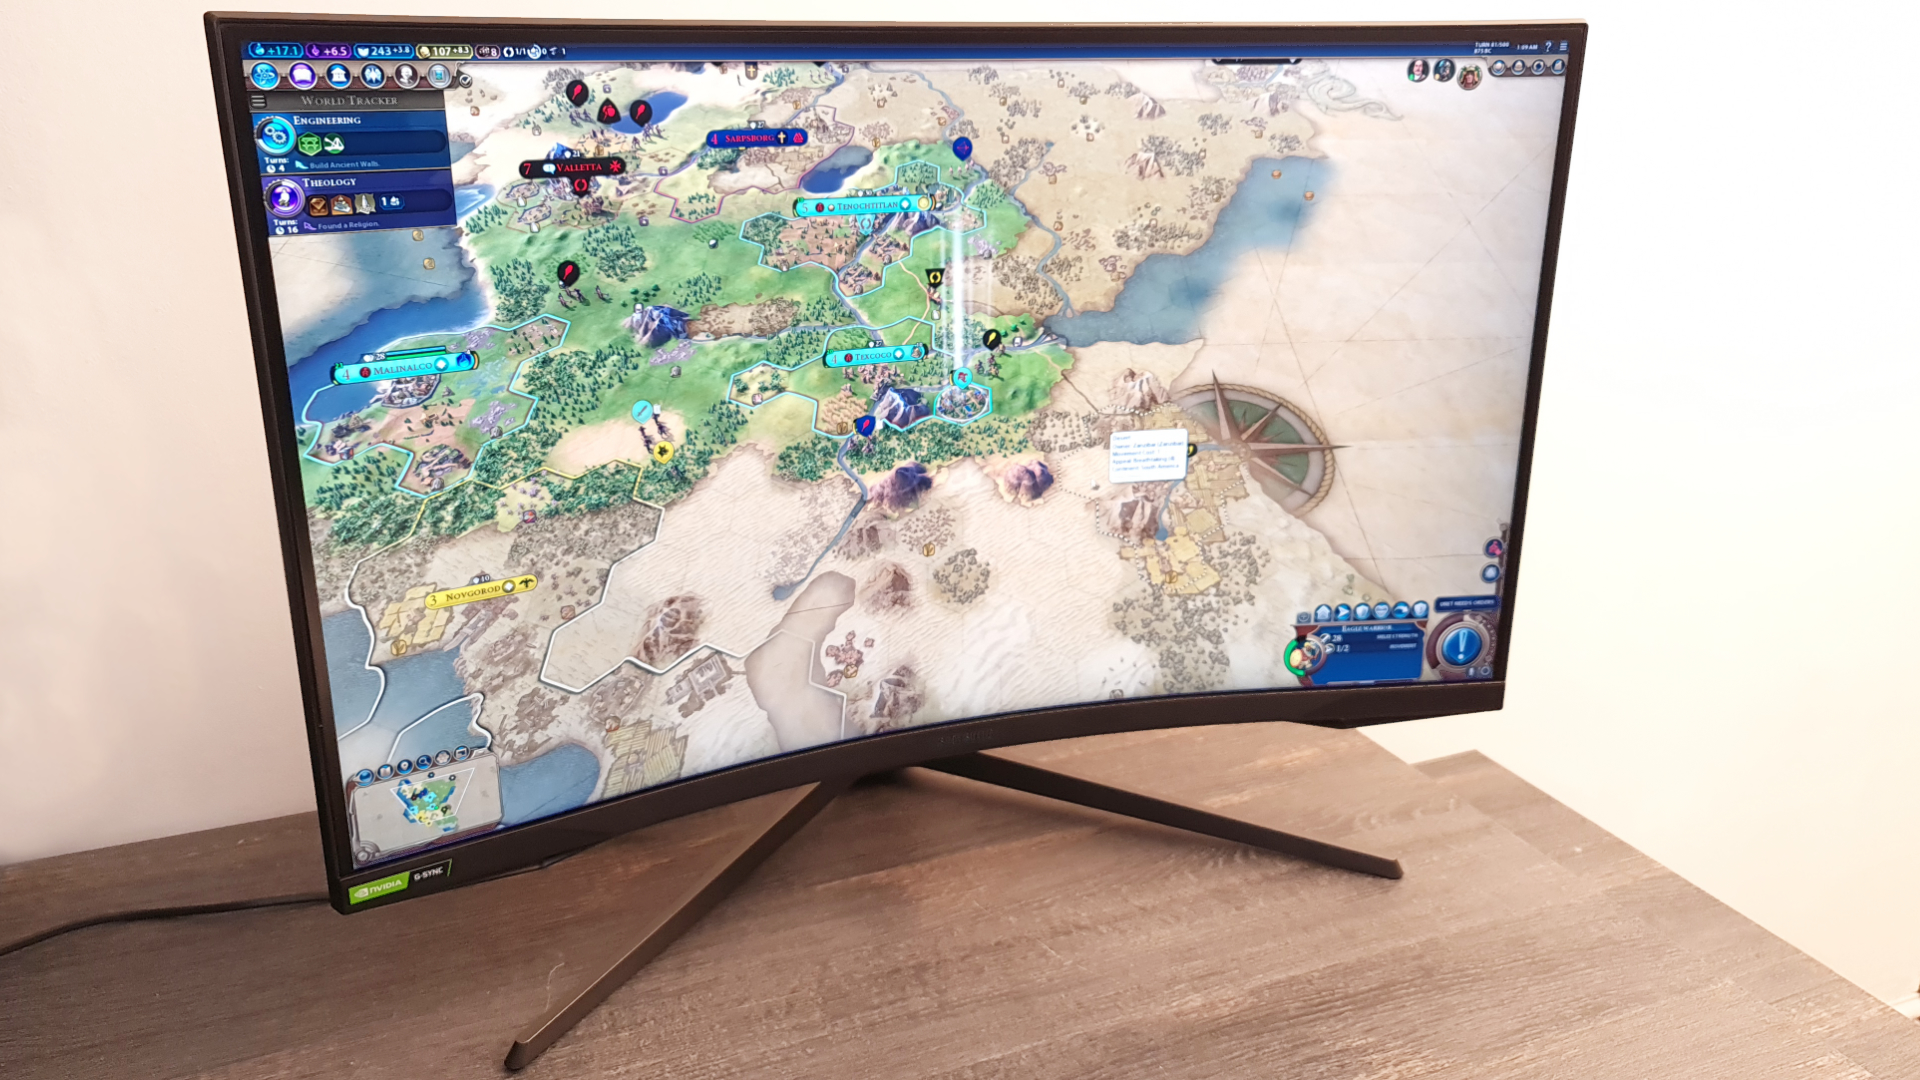 Samsung Odyssey G7 C27G7 gaming monitor review